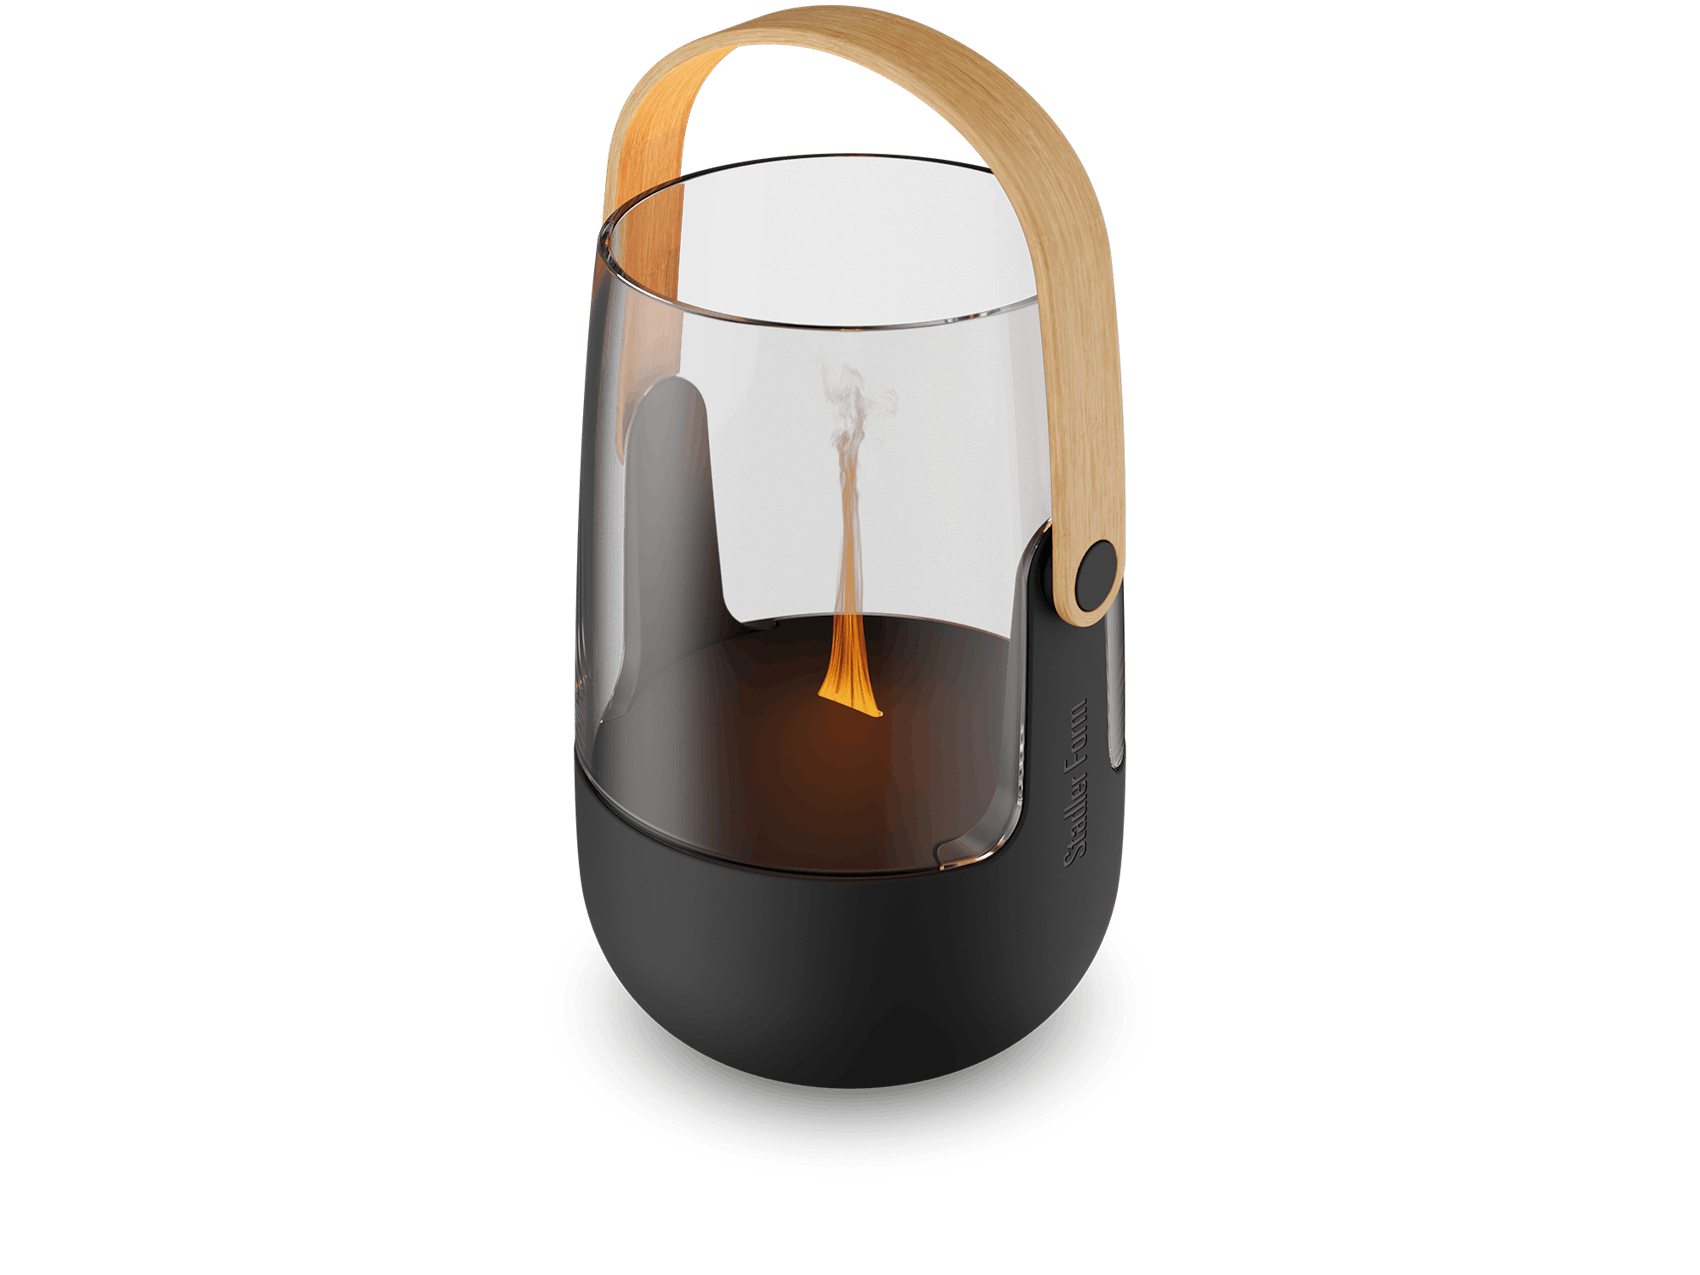 Sophie little aroma diffuser by Stadler Form in black as perspective view